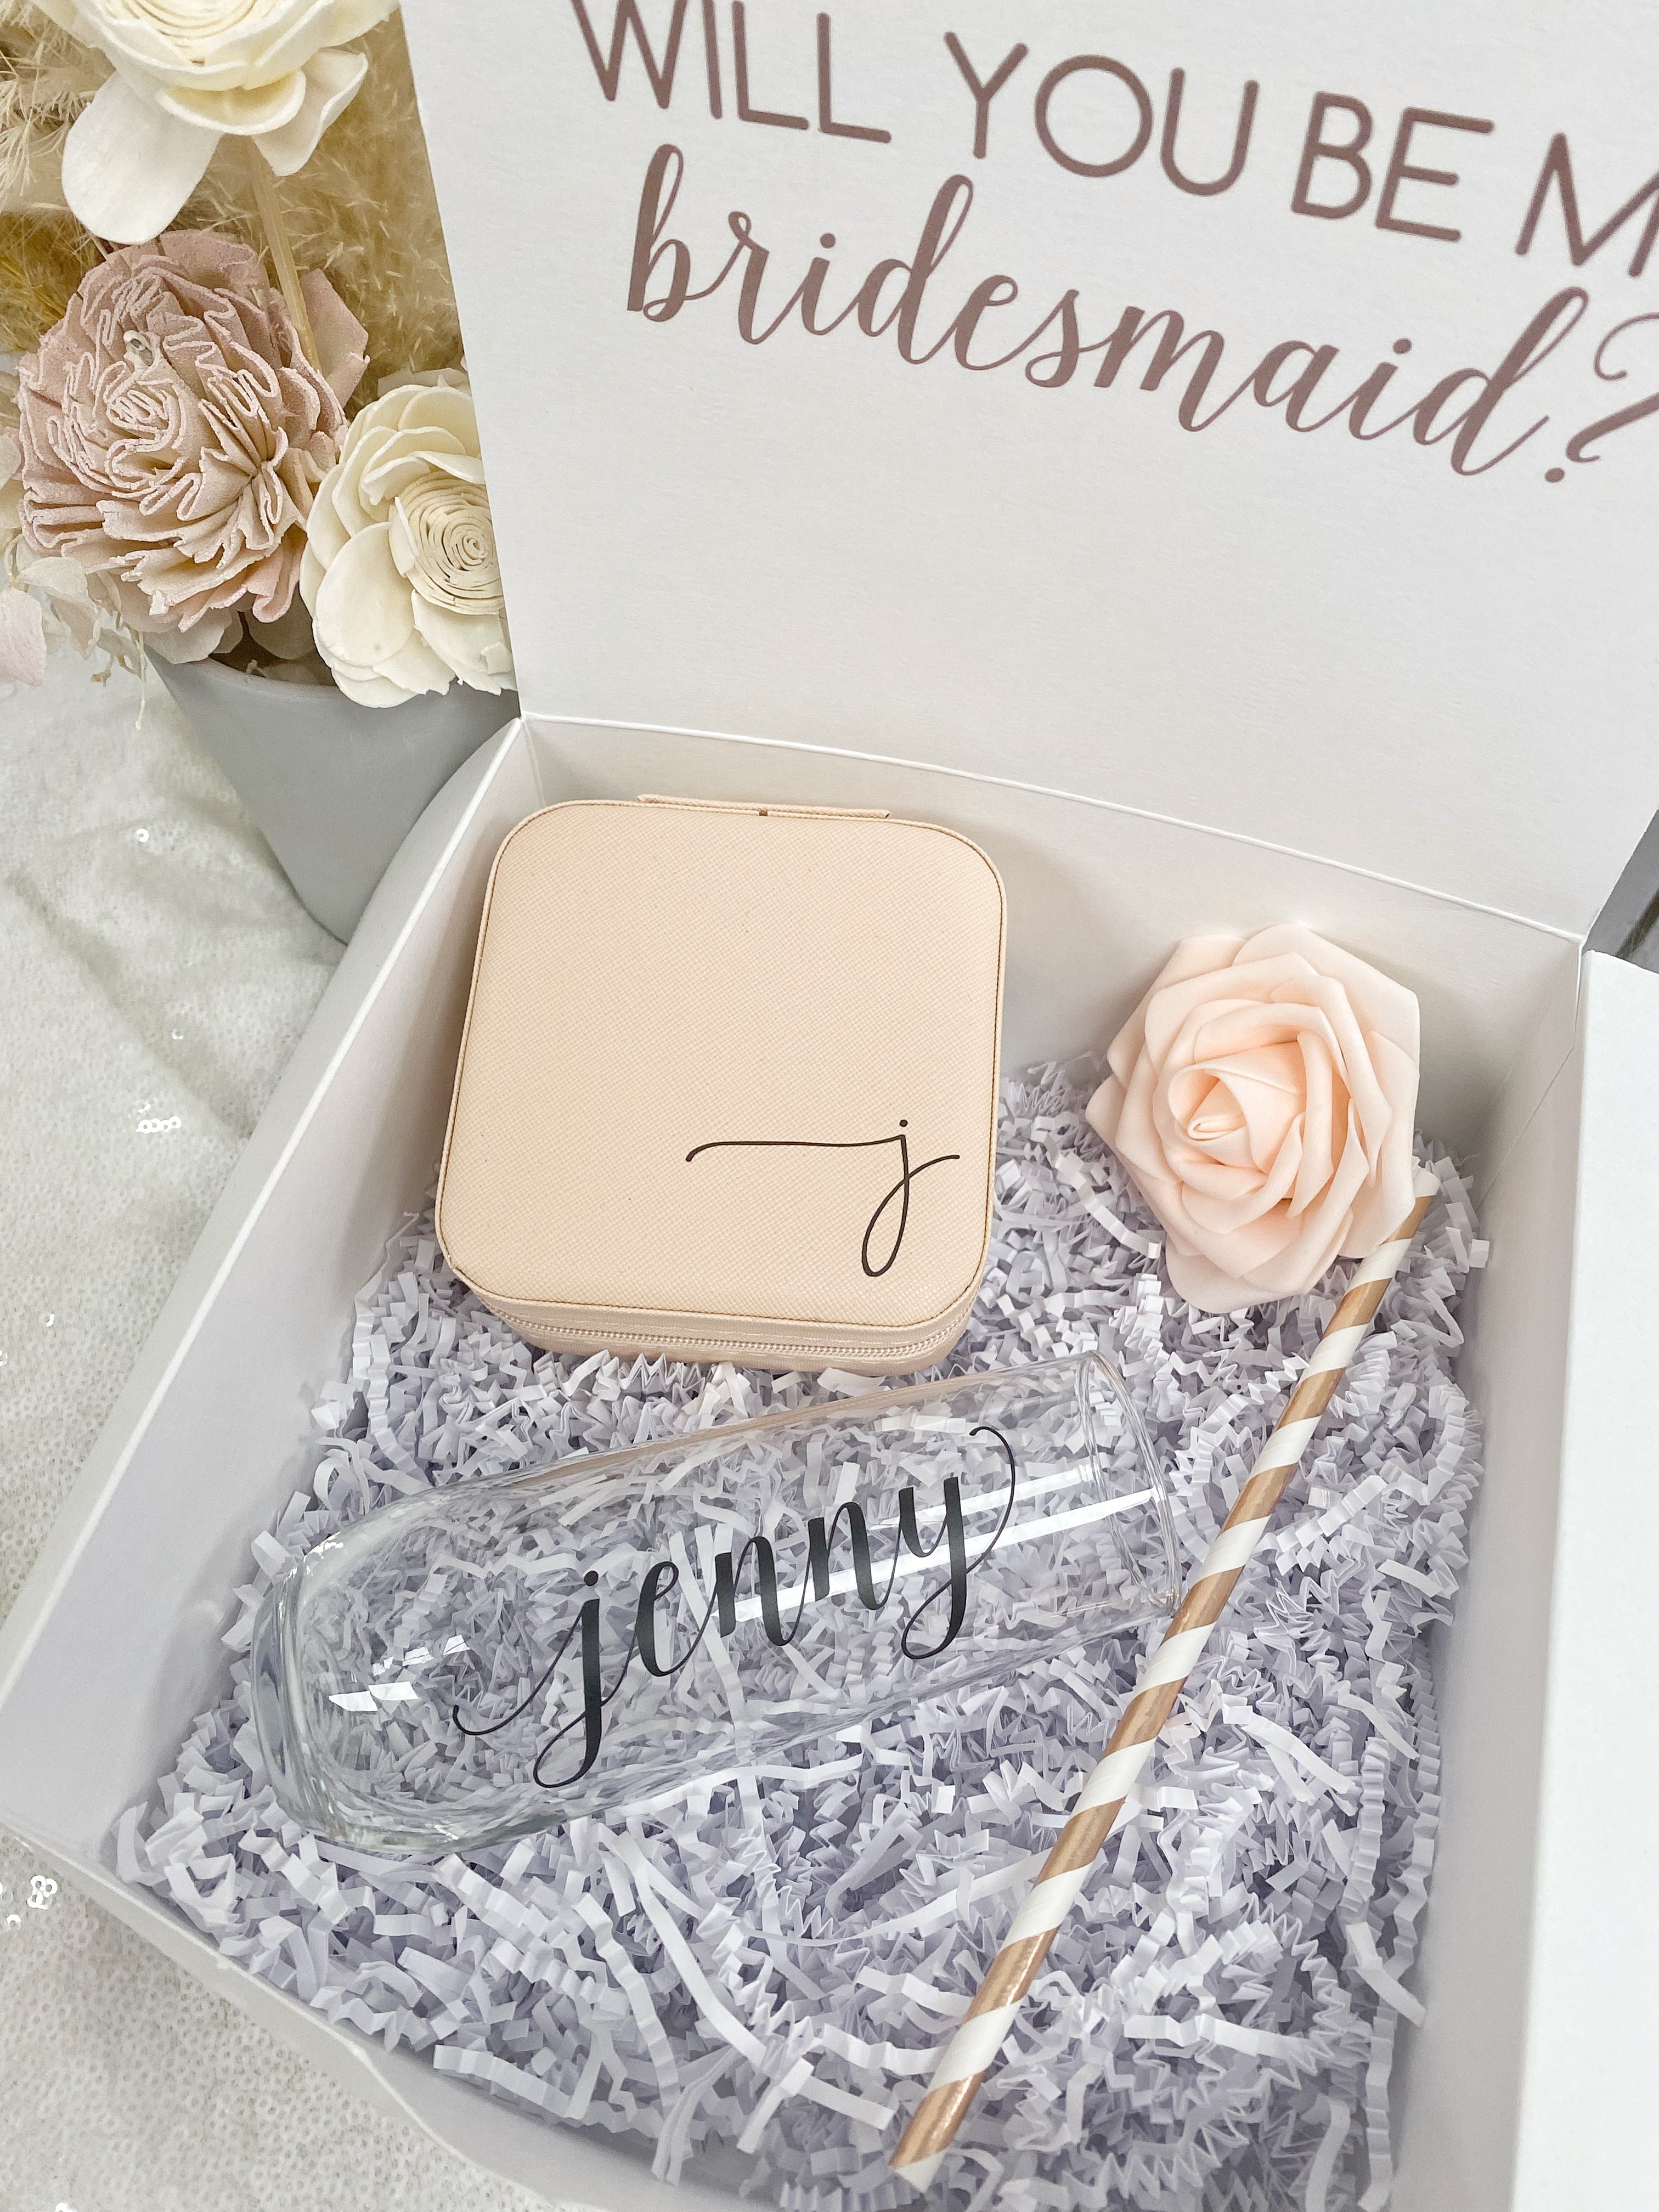 Bridesmaid proposal gift box set- bridesmaid personalized champagne flute- maid of honor proposal- personalized travel jewelry case